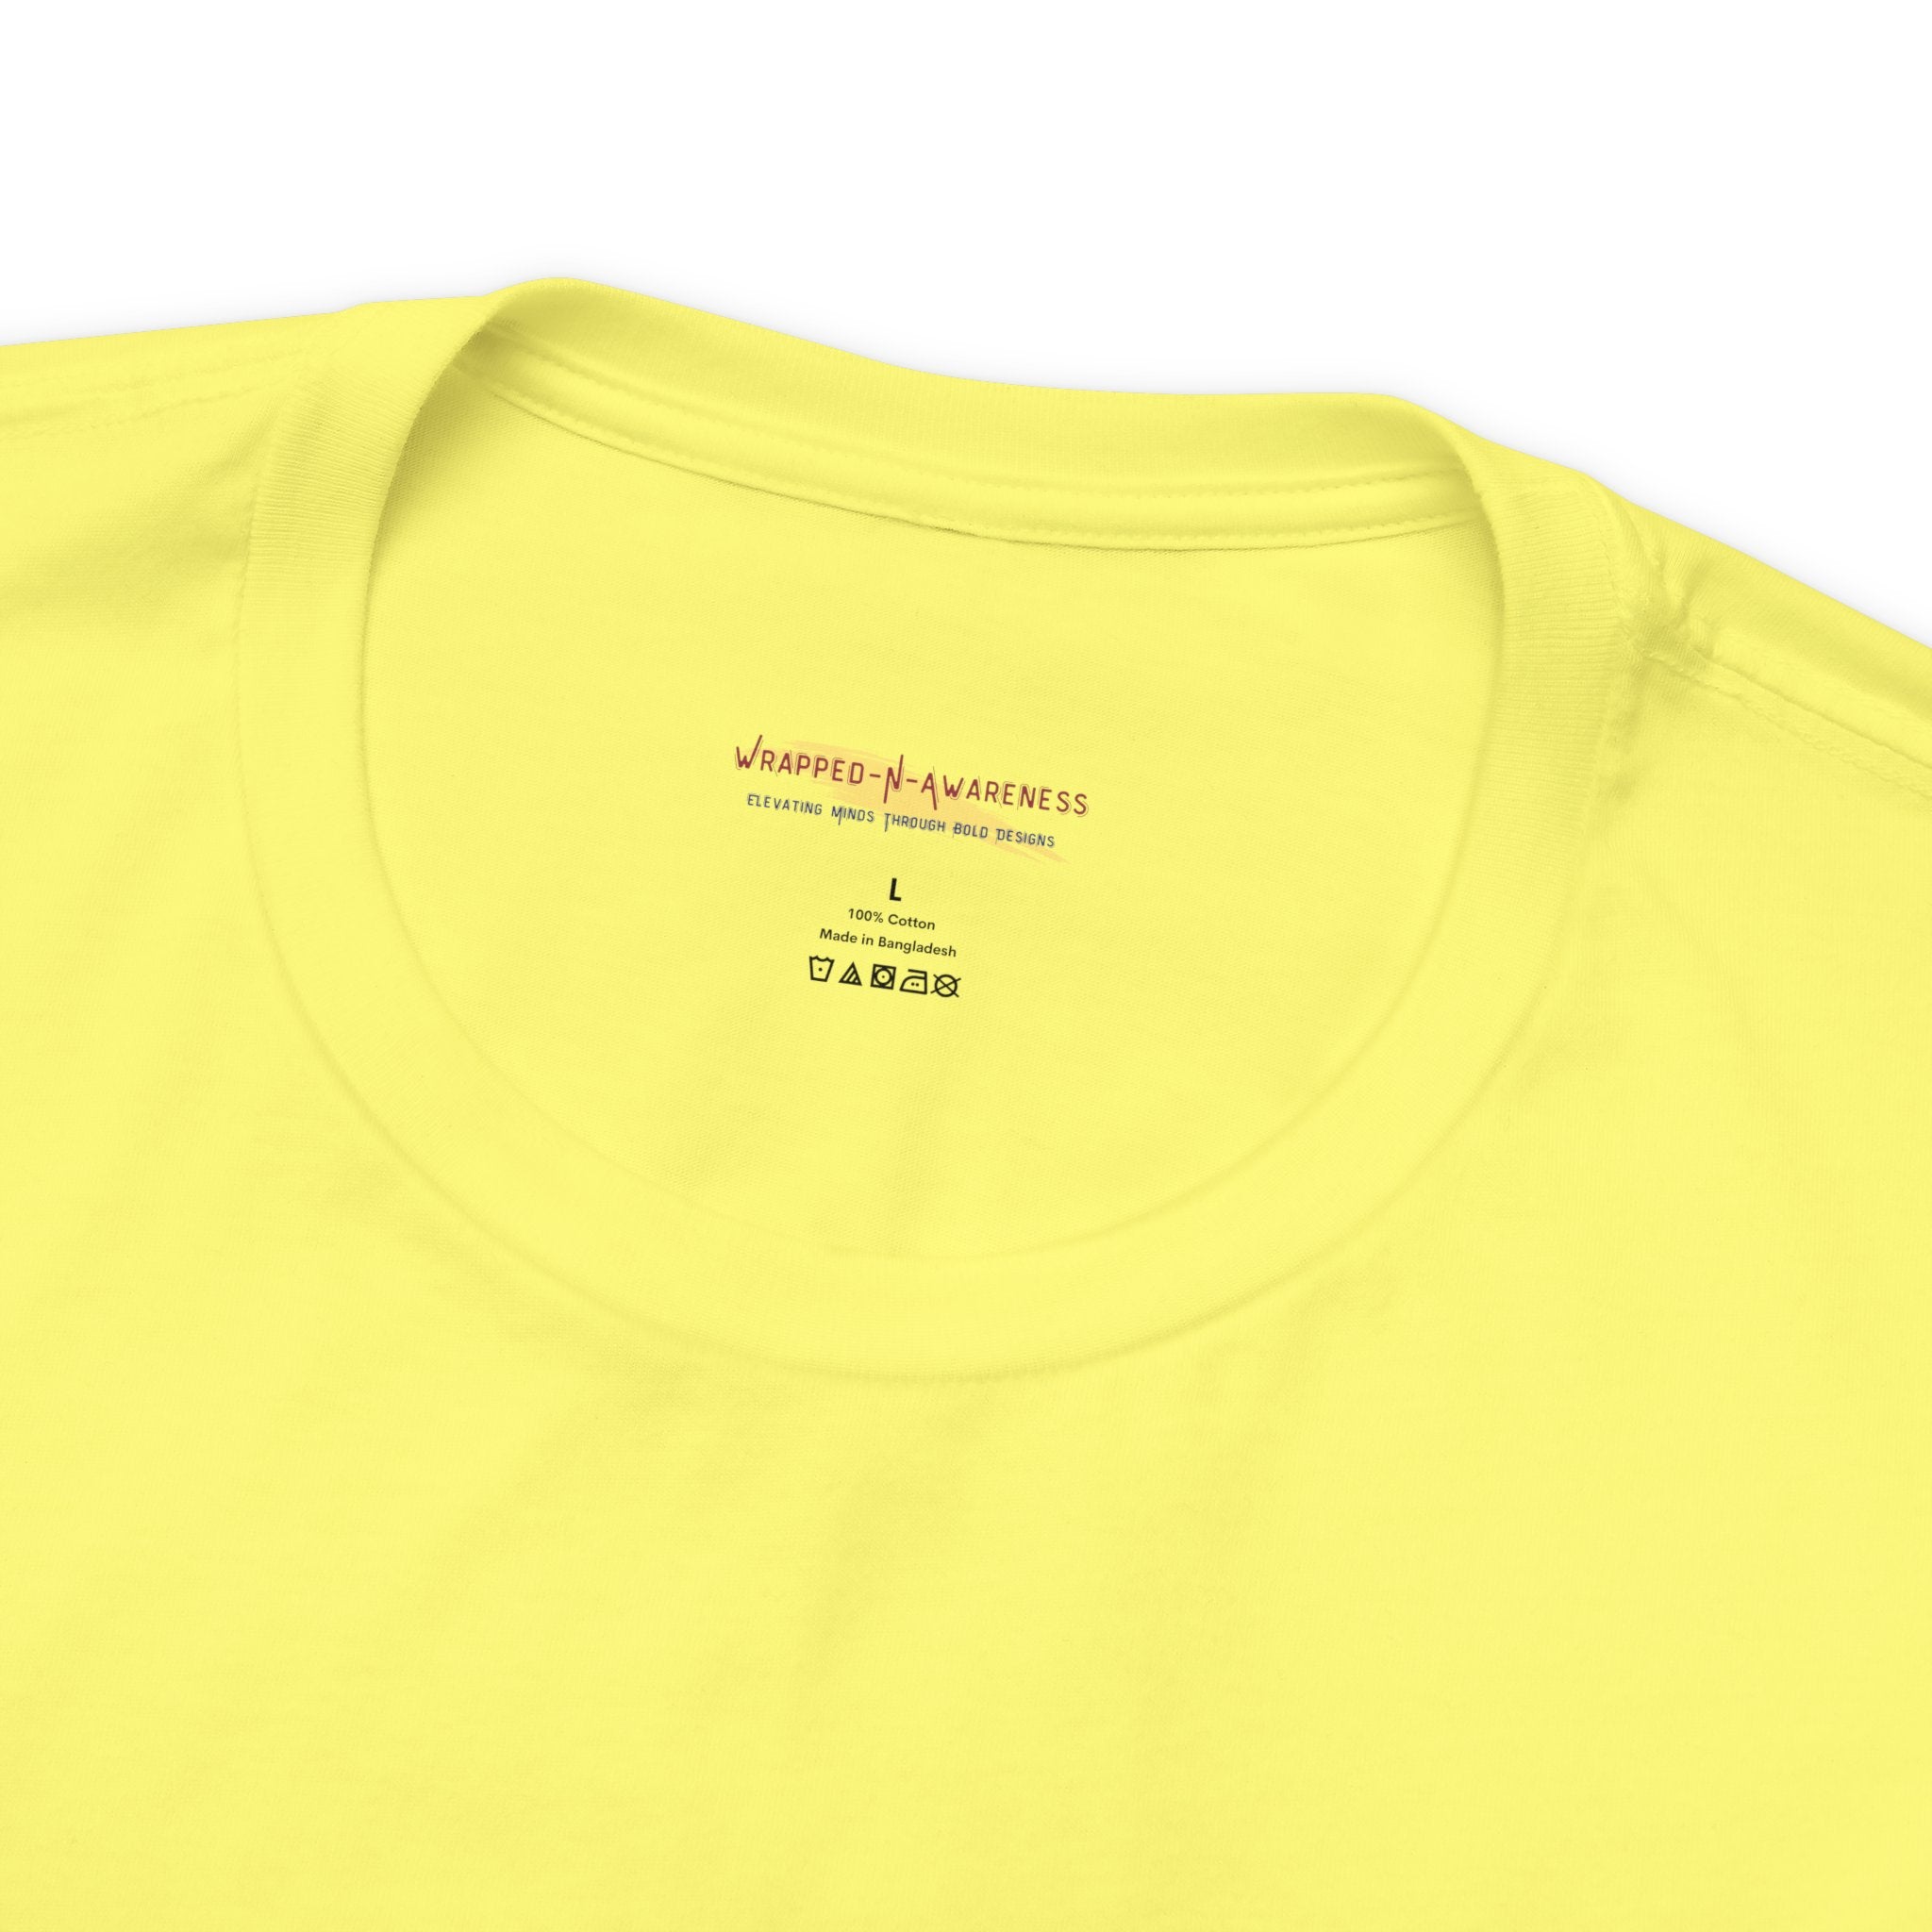 Progress Over Perfection Tee - Bella+Canvas 3001 Yellow Airlume Cotton Bella+Canvas 3001 Crew Neckline Jersey Short Sleeve Lightweight Fabric Mental Health Support Retail Fit Tear-away Label Tee Unisex Tee T-Shirt 4677869499185737270_2048 Printify